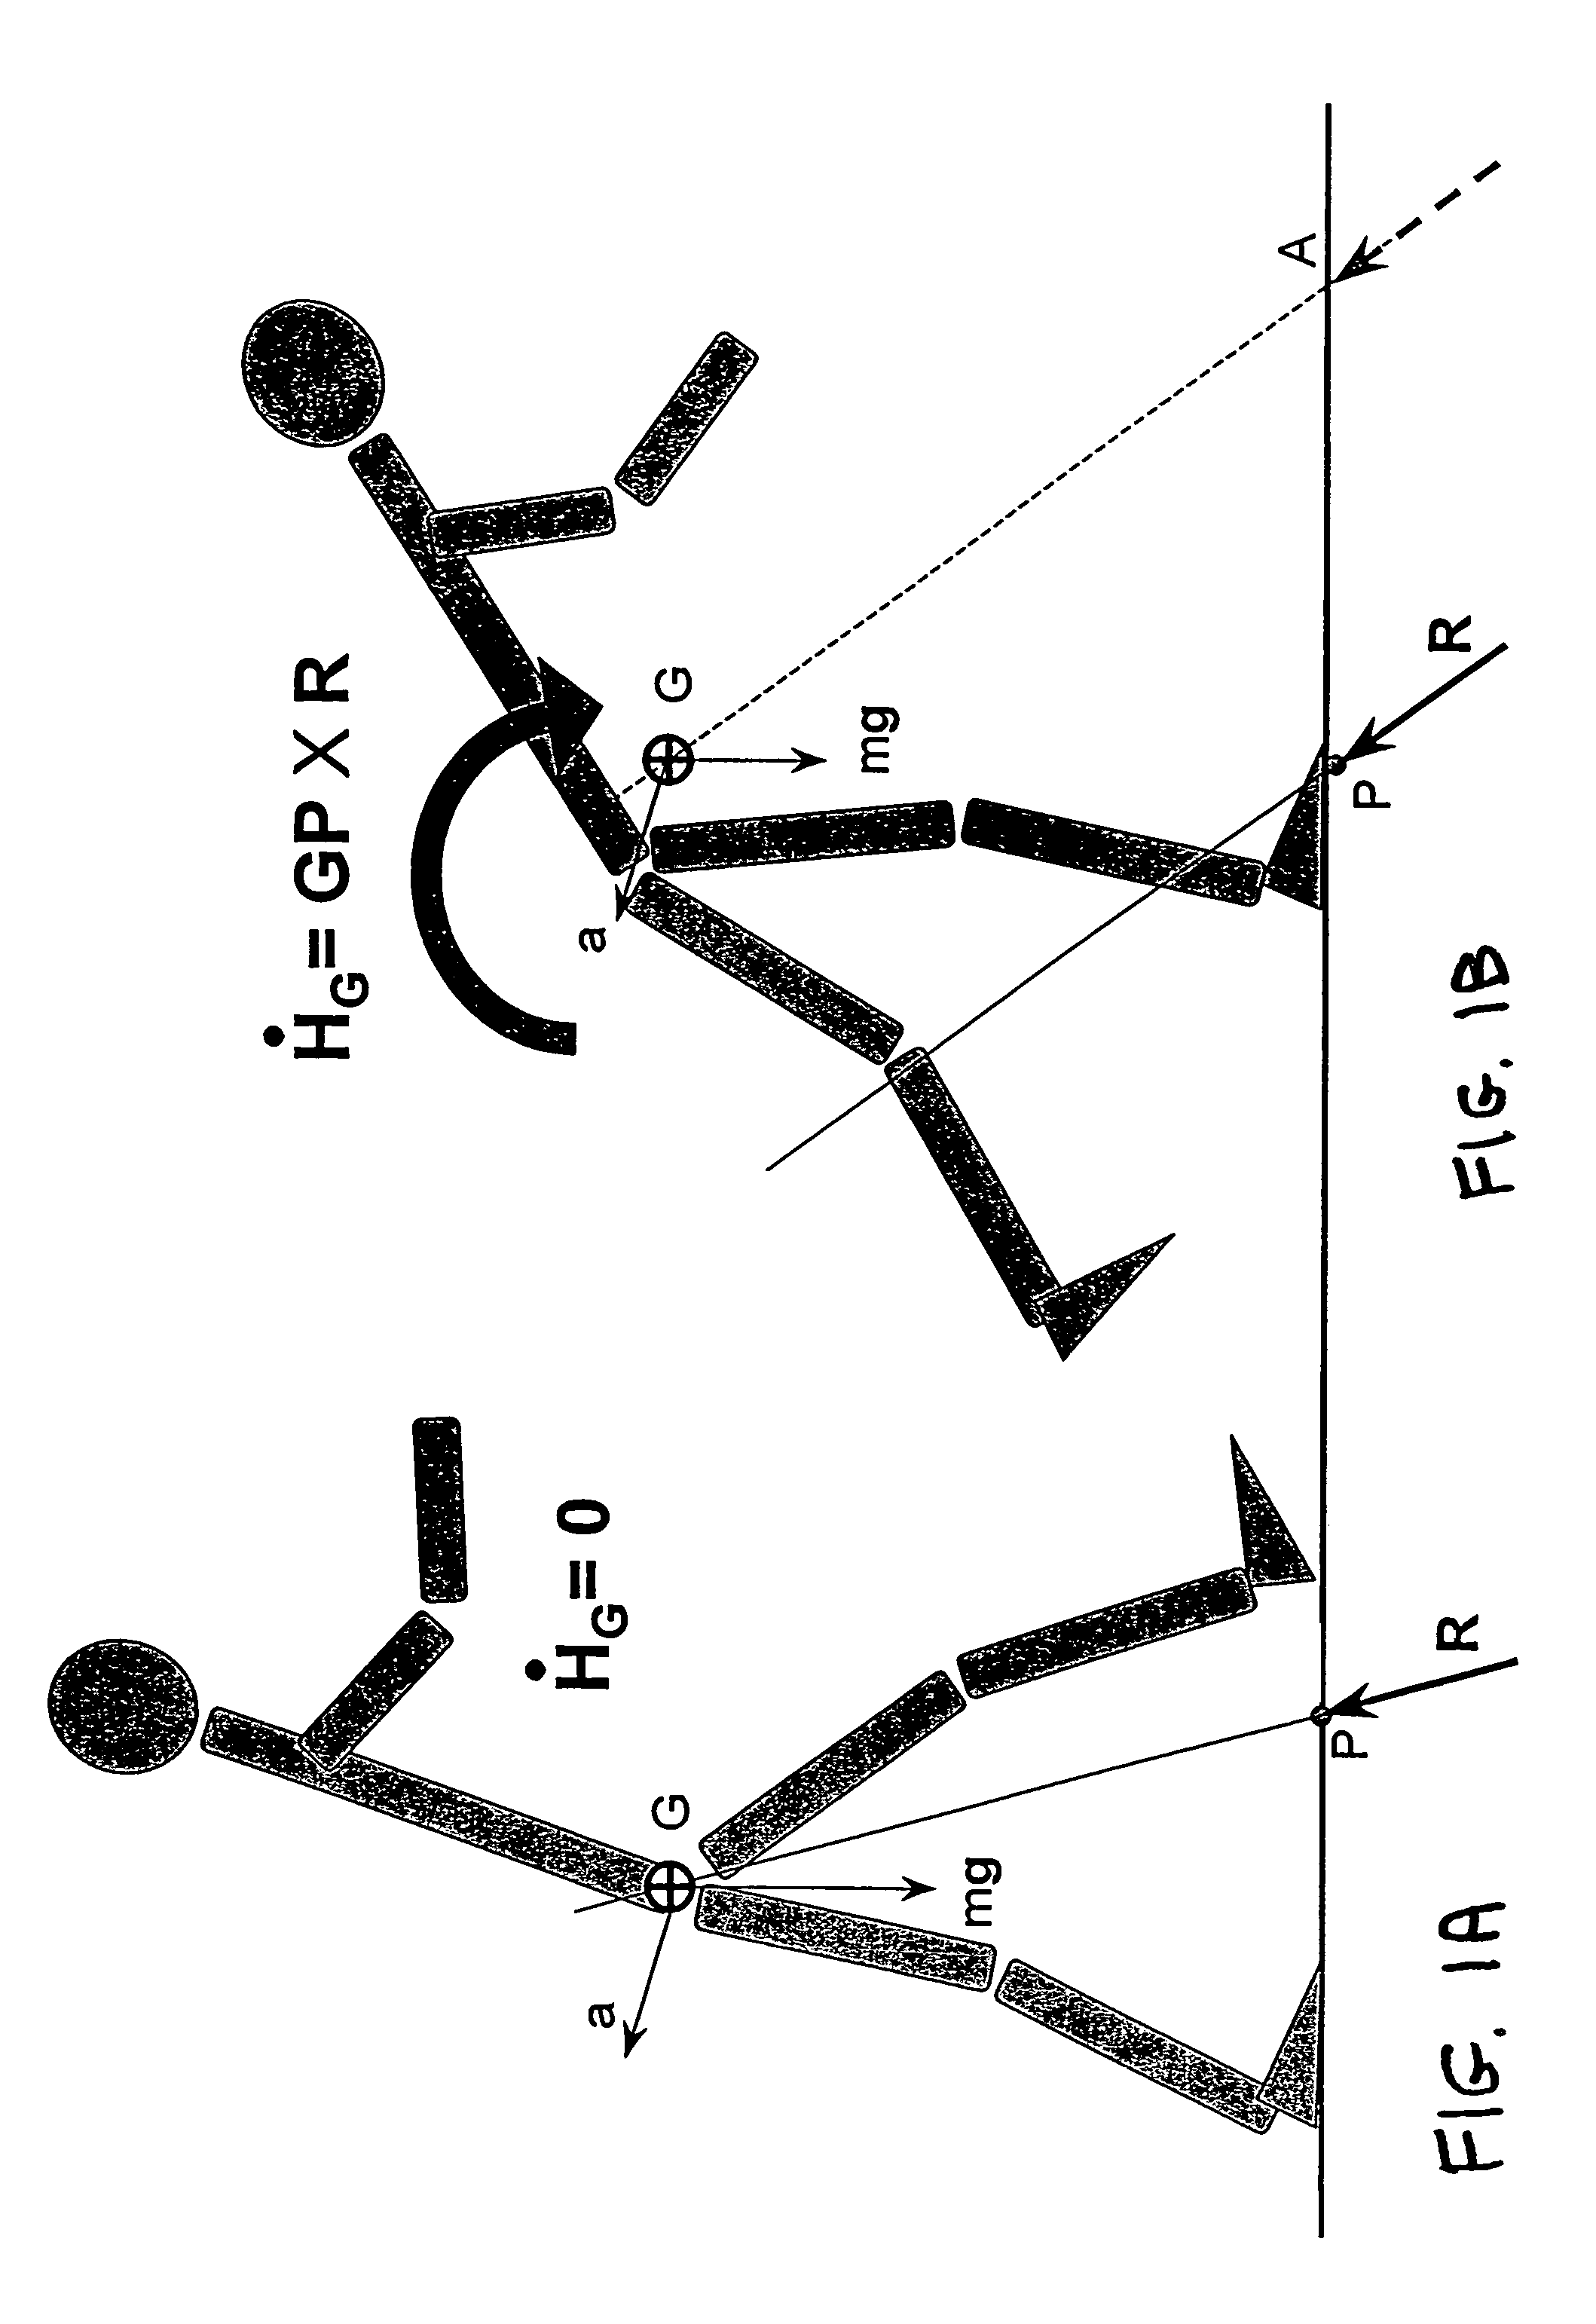 Systems and methods for controlling a legged robot based on rate of change of angular momentum